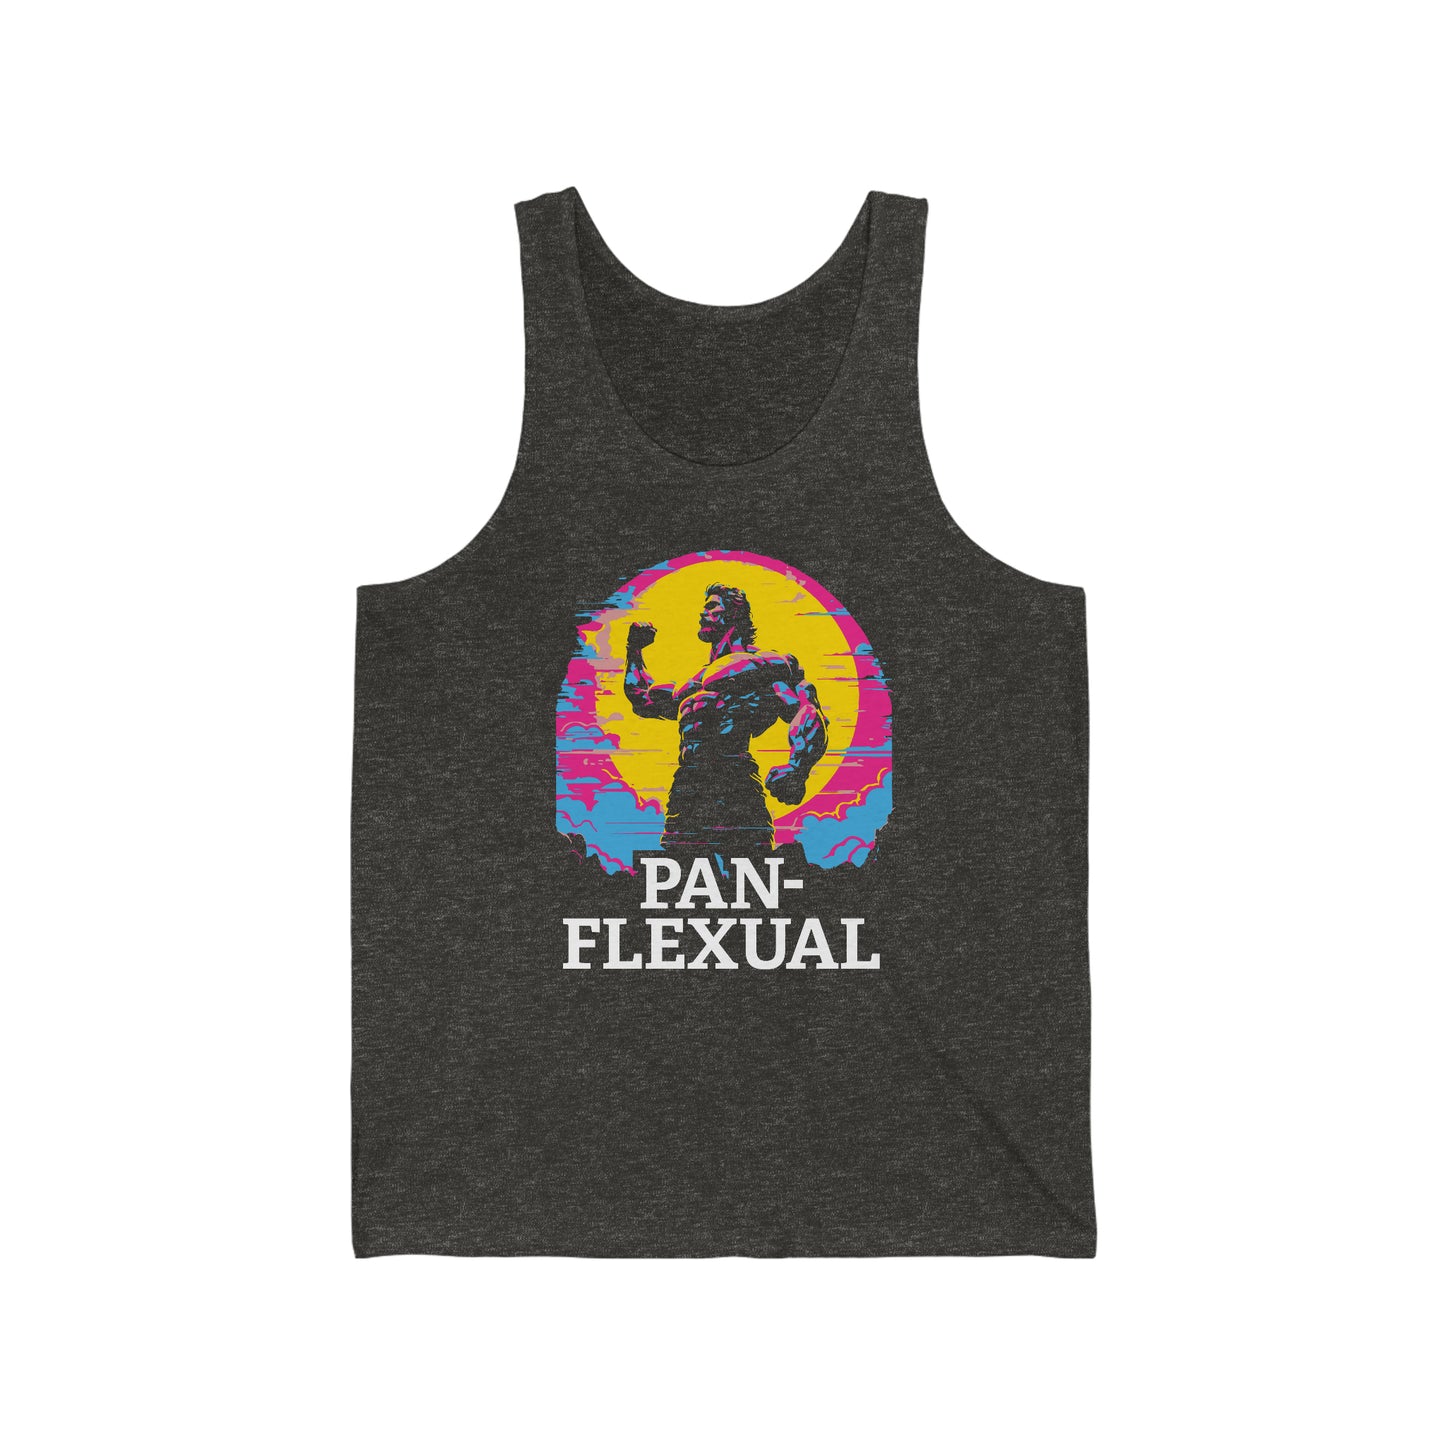 Heather gray tank top featuring a graphic with a muscled bodybuilder and the phrase "Pan-Flexual" on it.